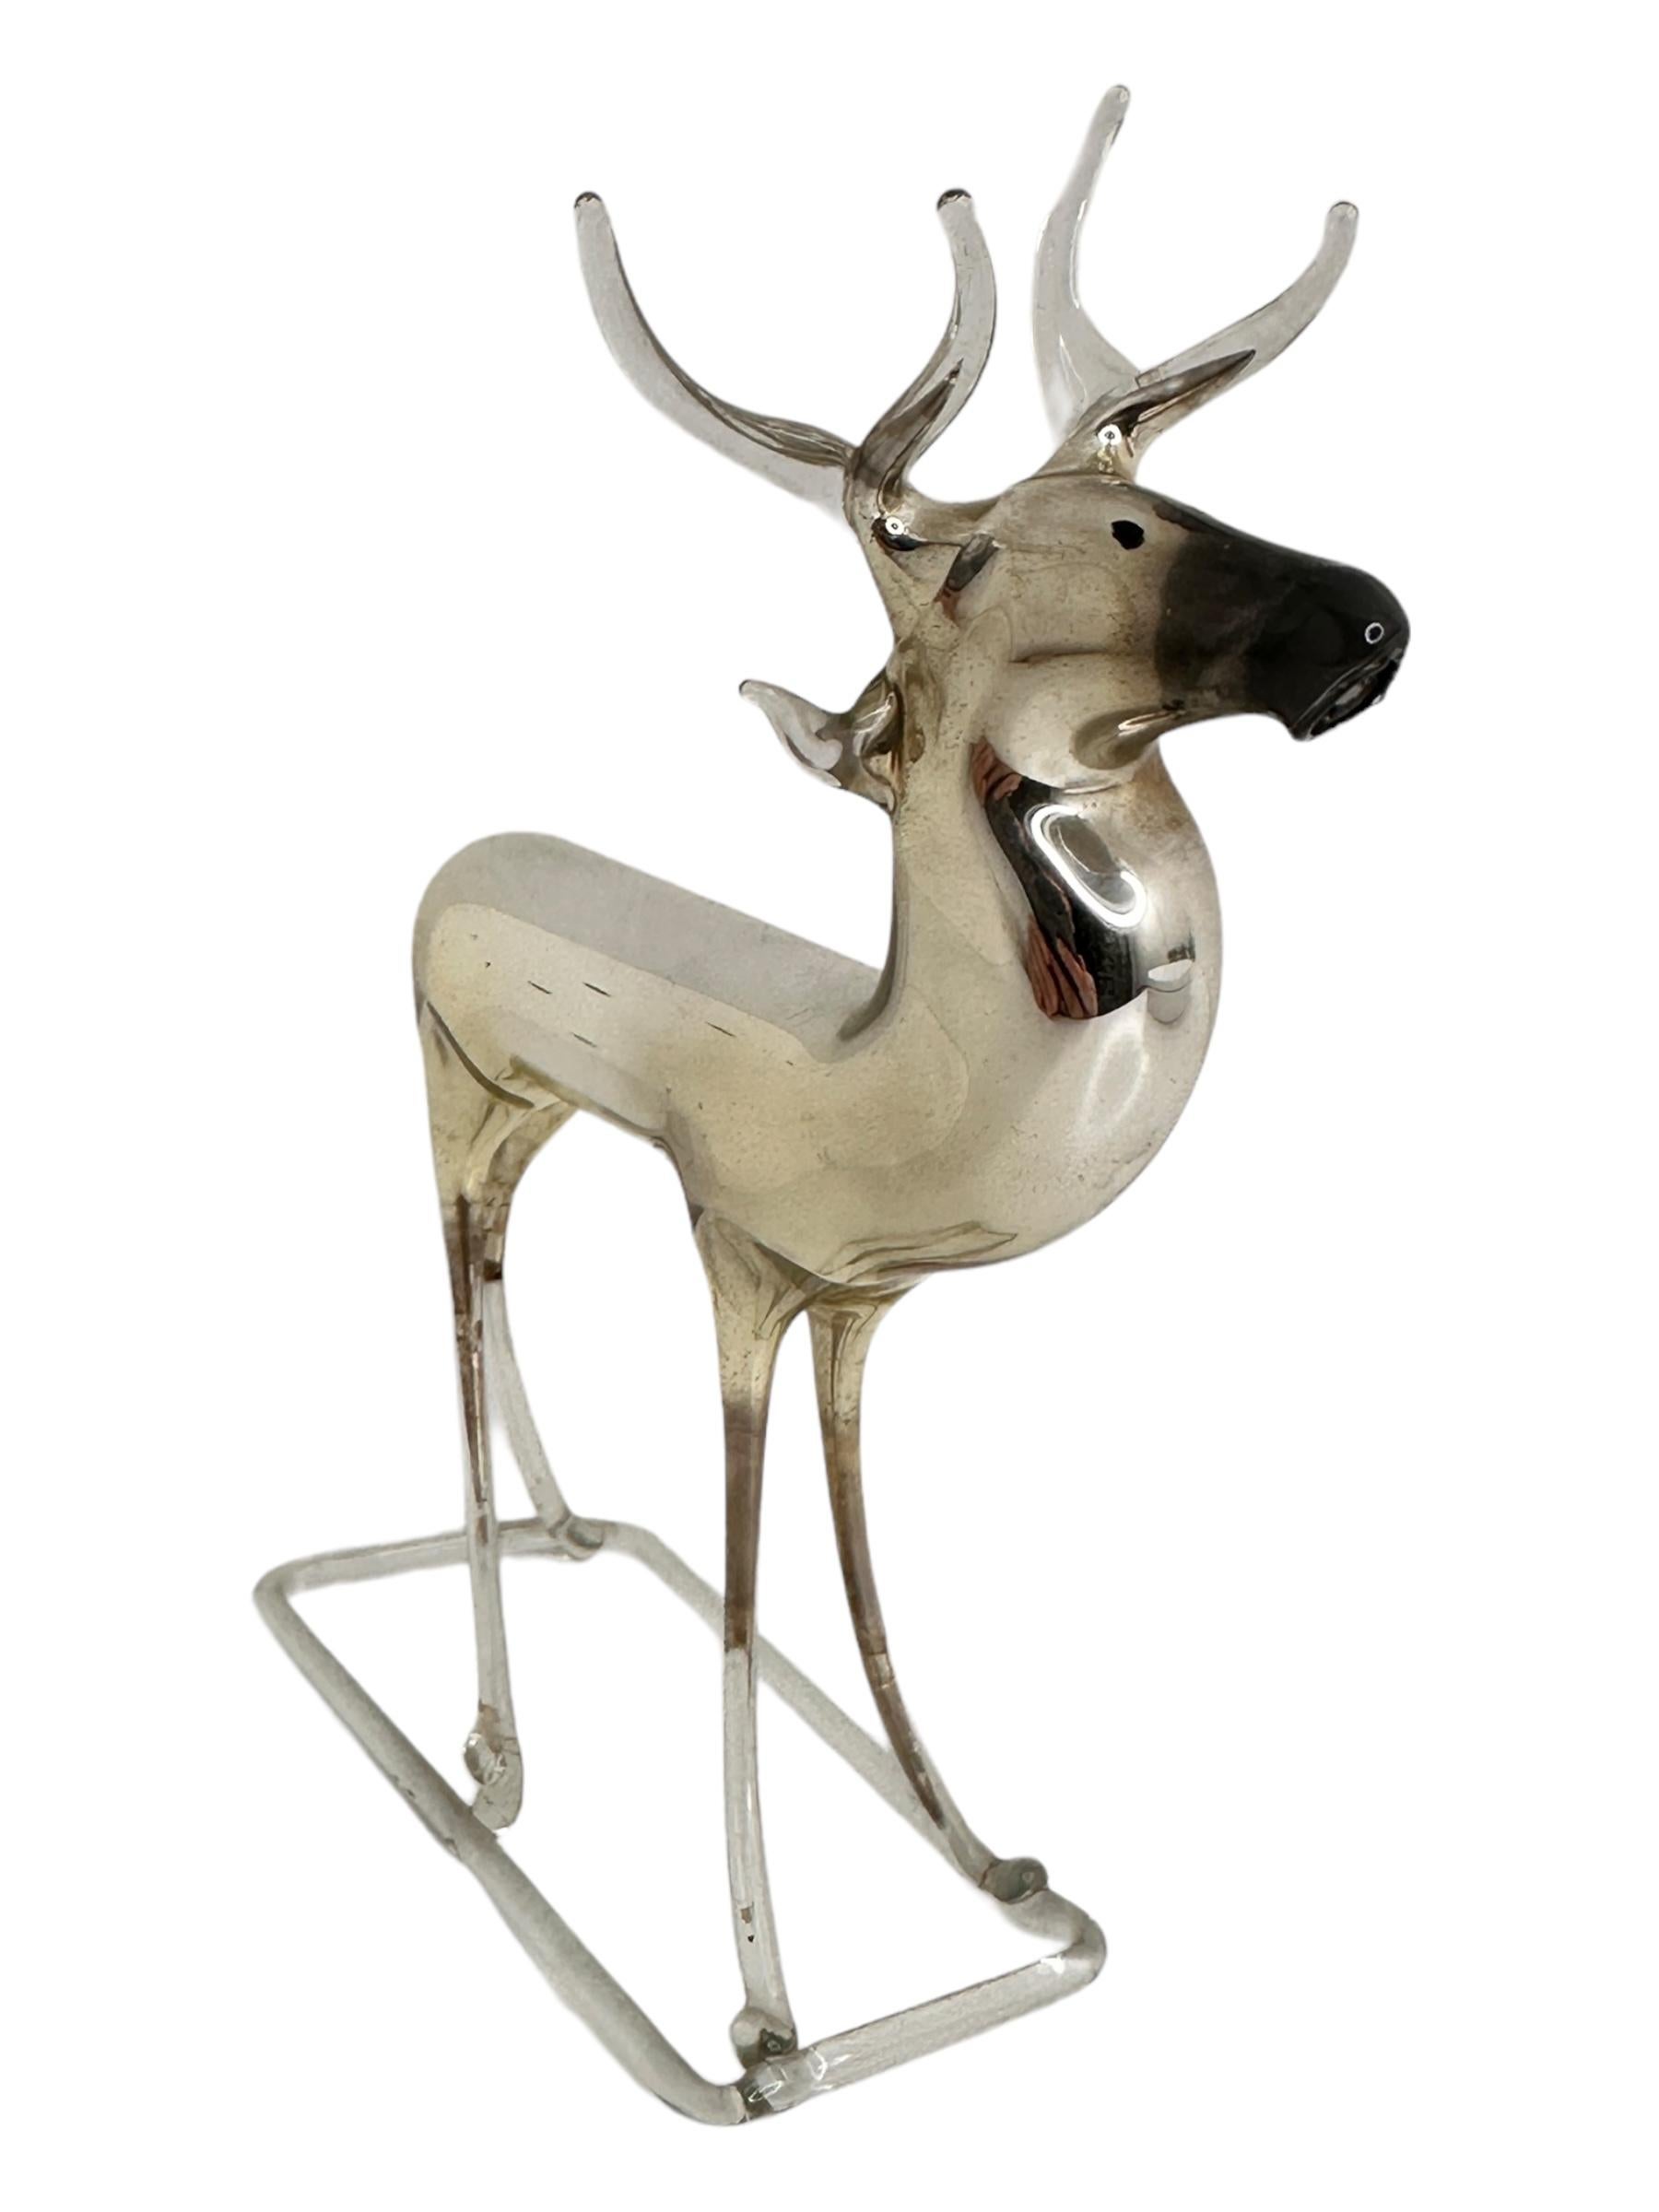 Classic early-20th century hand blown Deer Figurine, made probably in the Lauscha Thuringia Area in Germany. Excellent vintage condition, consistent with age and use. A nice addition to any collection. Found at an estate sale in Nuremberg, Germany.